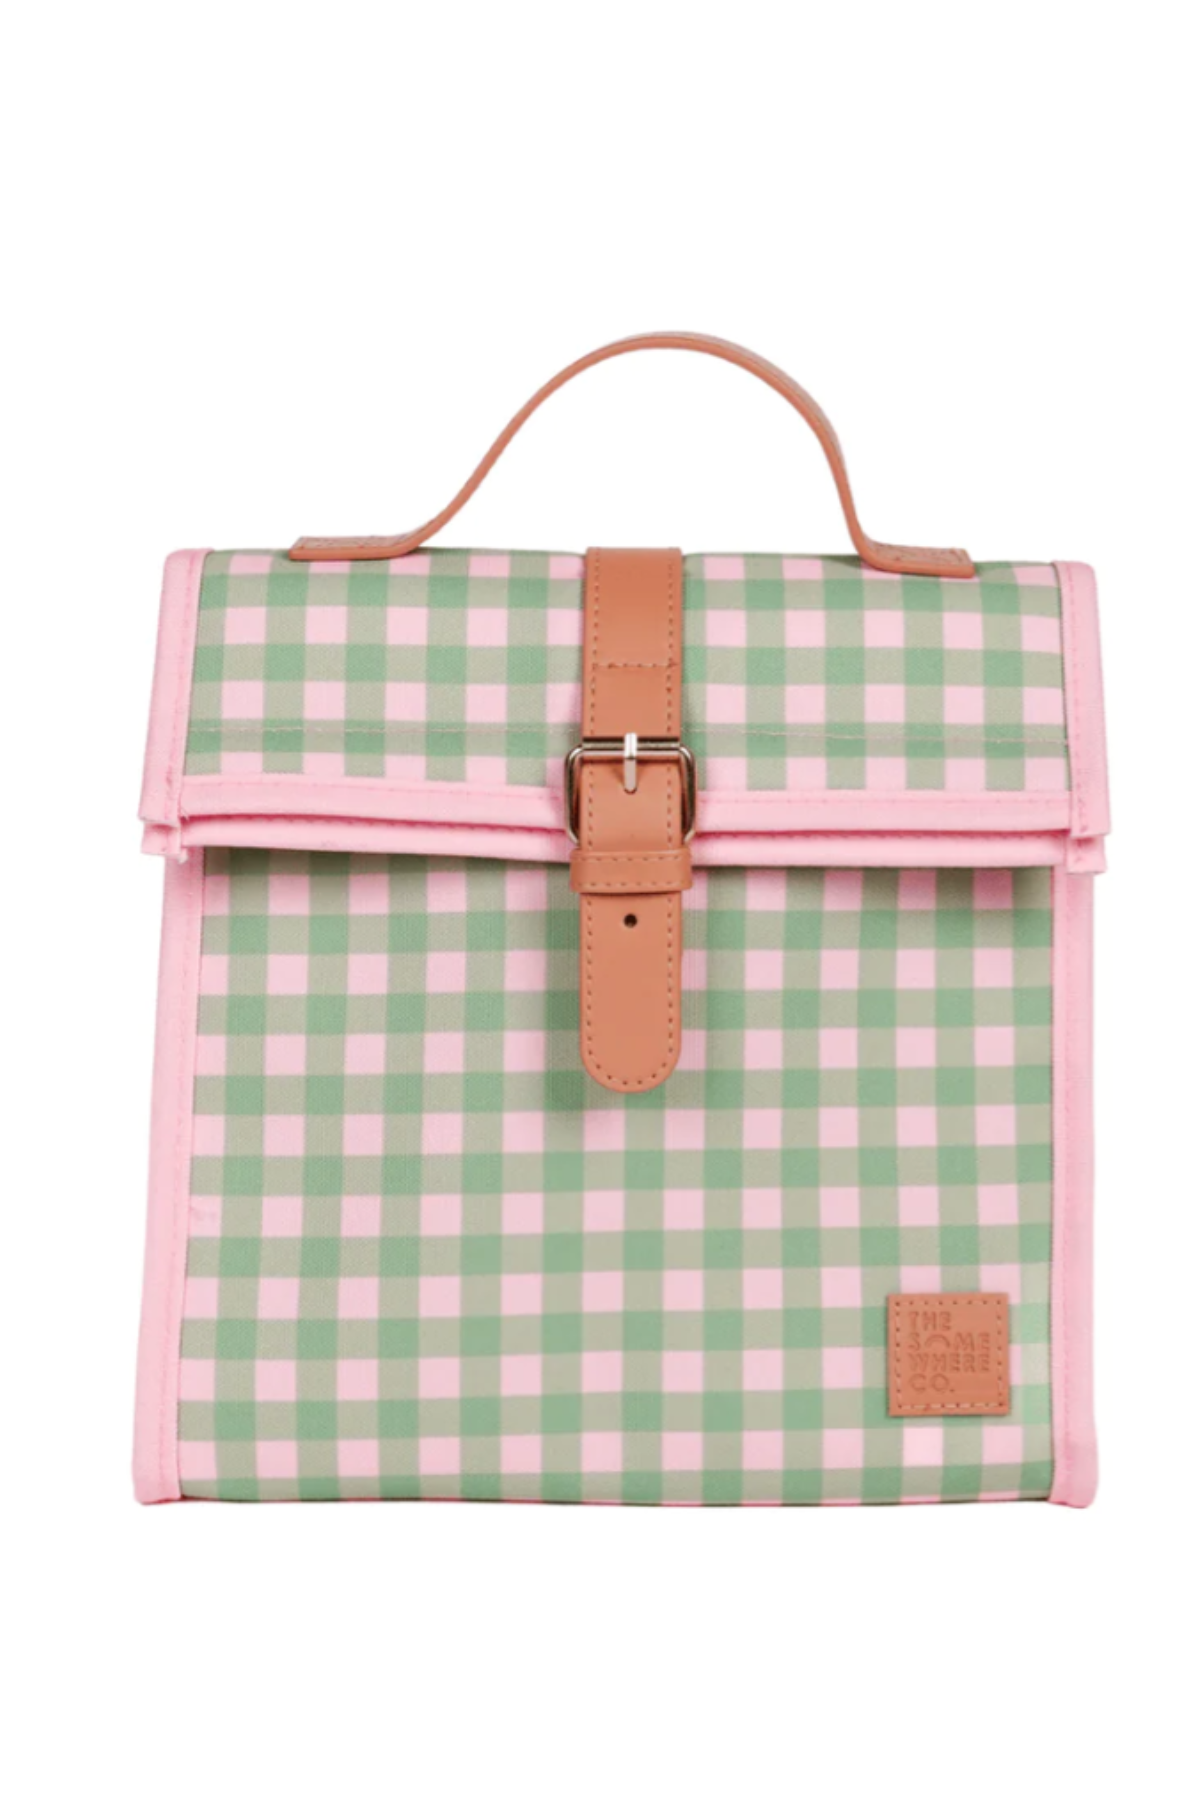 Versailles Lunch Satchel by The Somewhere Co